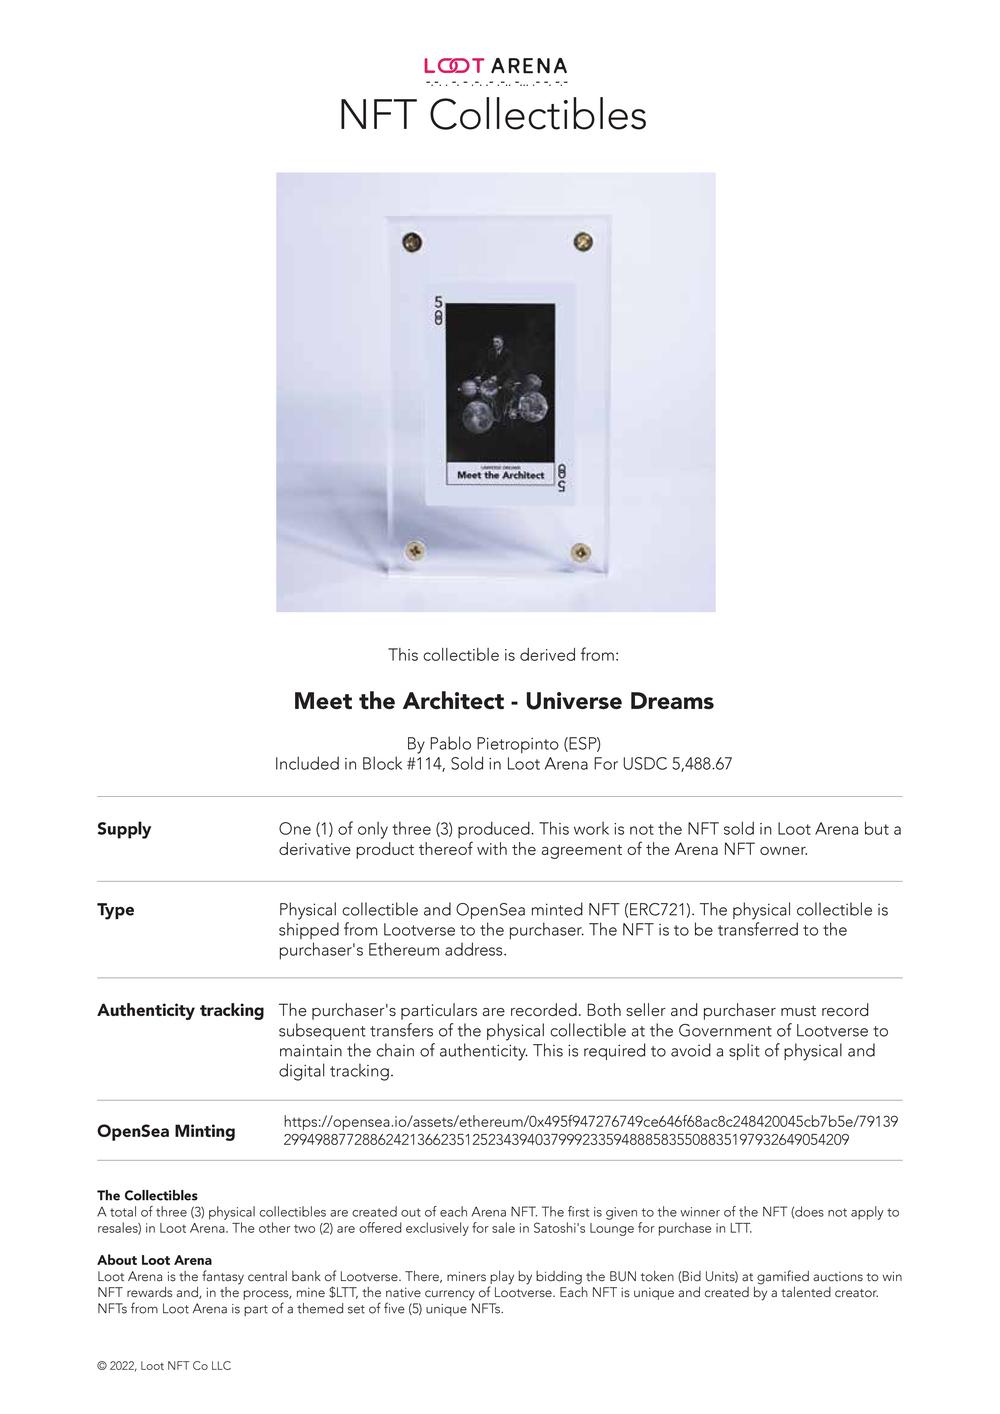 Contract_Meet the Architect.pdf